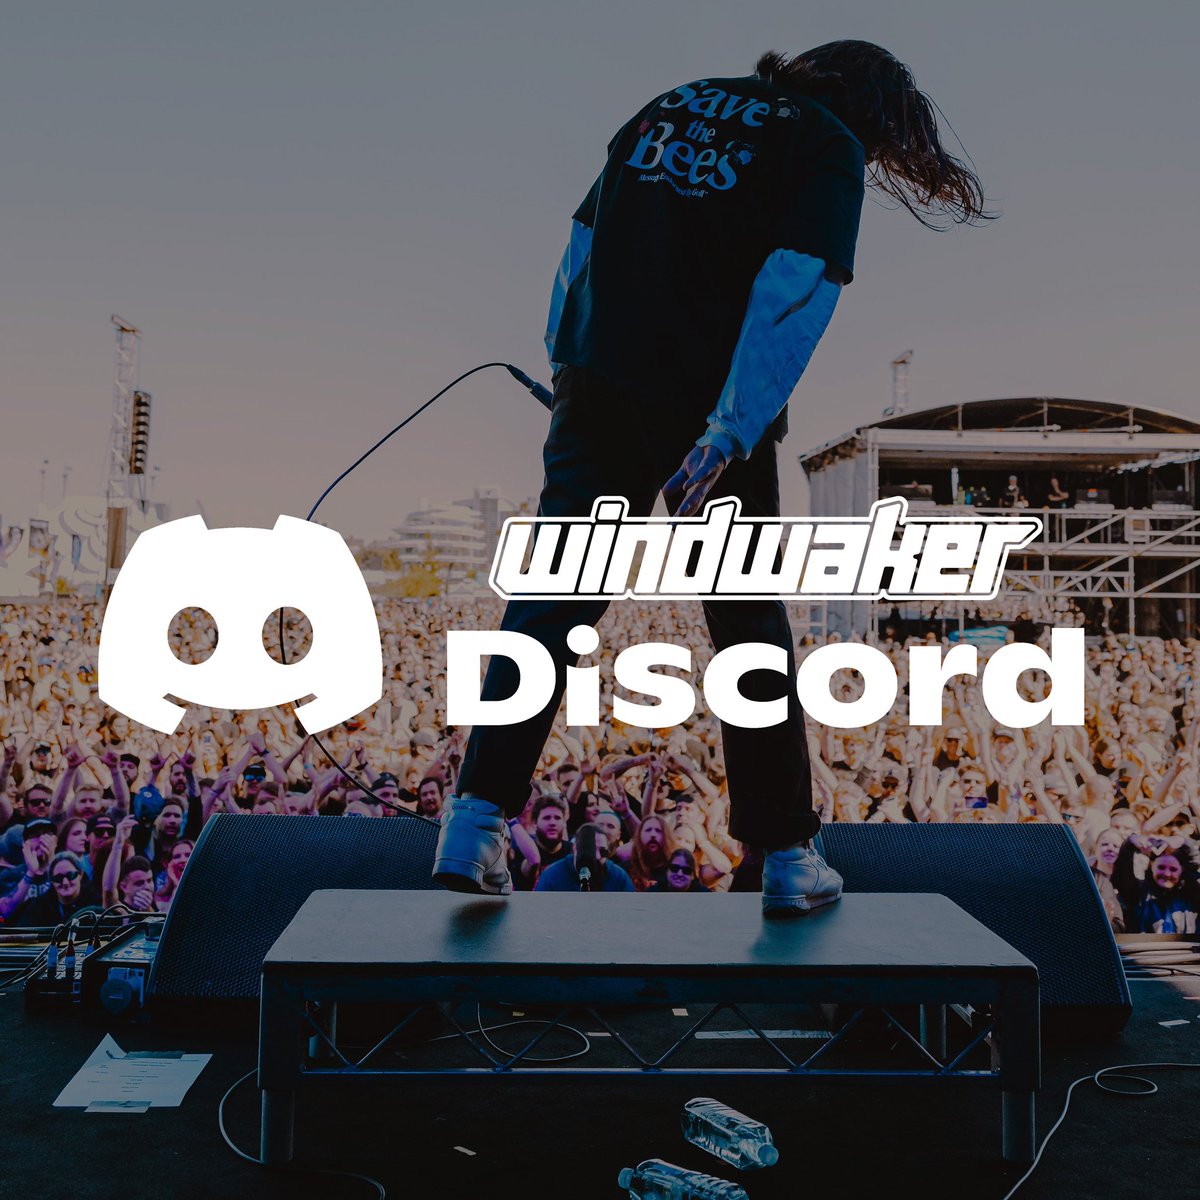 Windwaker Discord Roll Call 🗣️ We’ve just refreshed our discord server, come say hey before we start leaking everything we’ve been working on xx discord.gg/TCbJMQqz